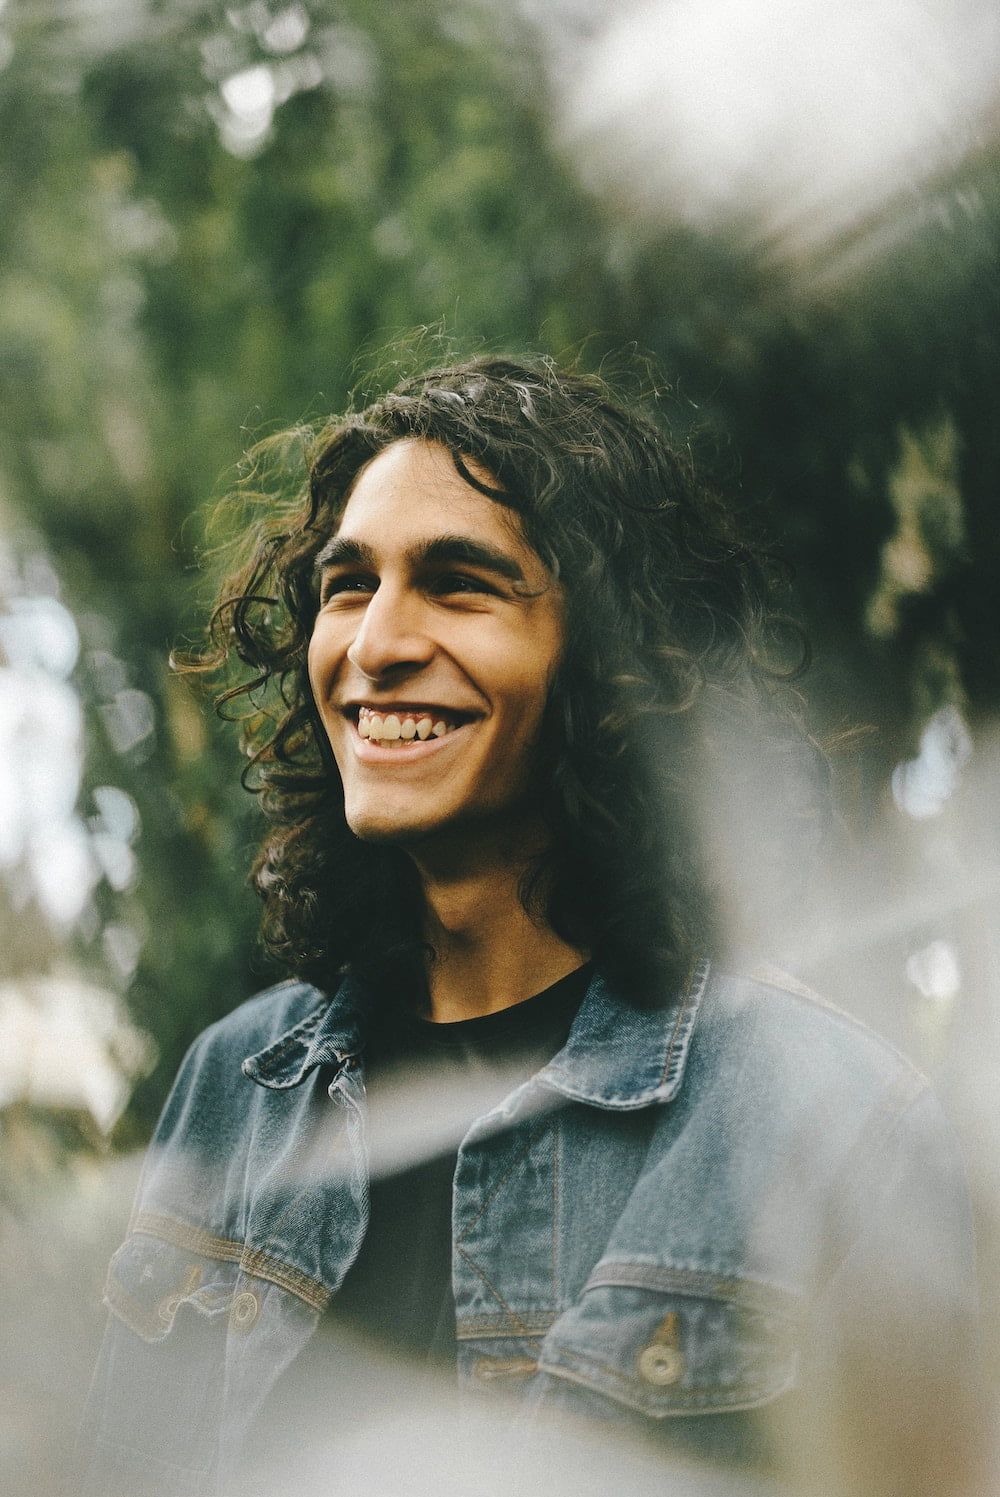 man with long dark curly hair smiling